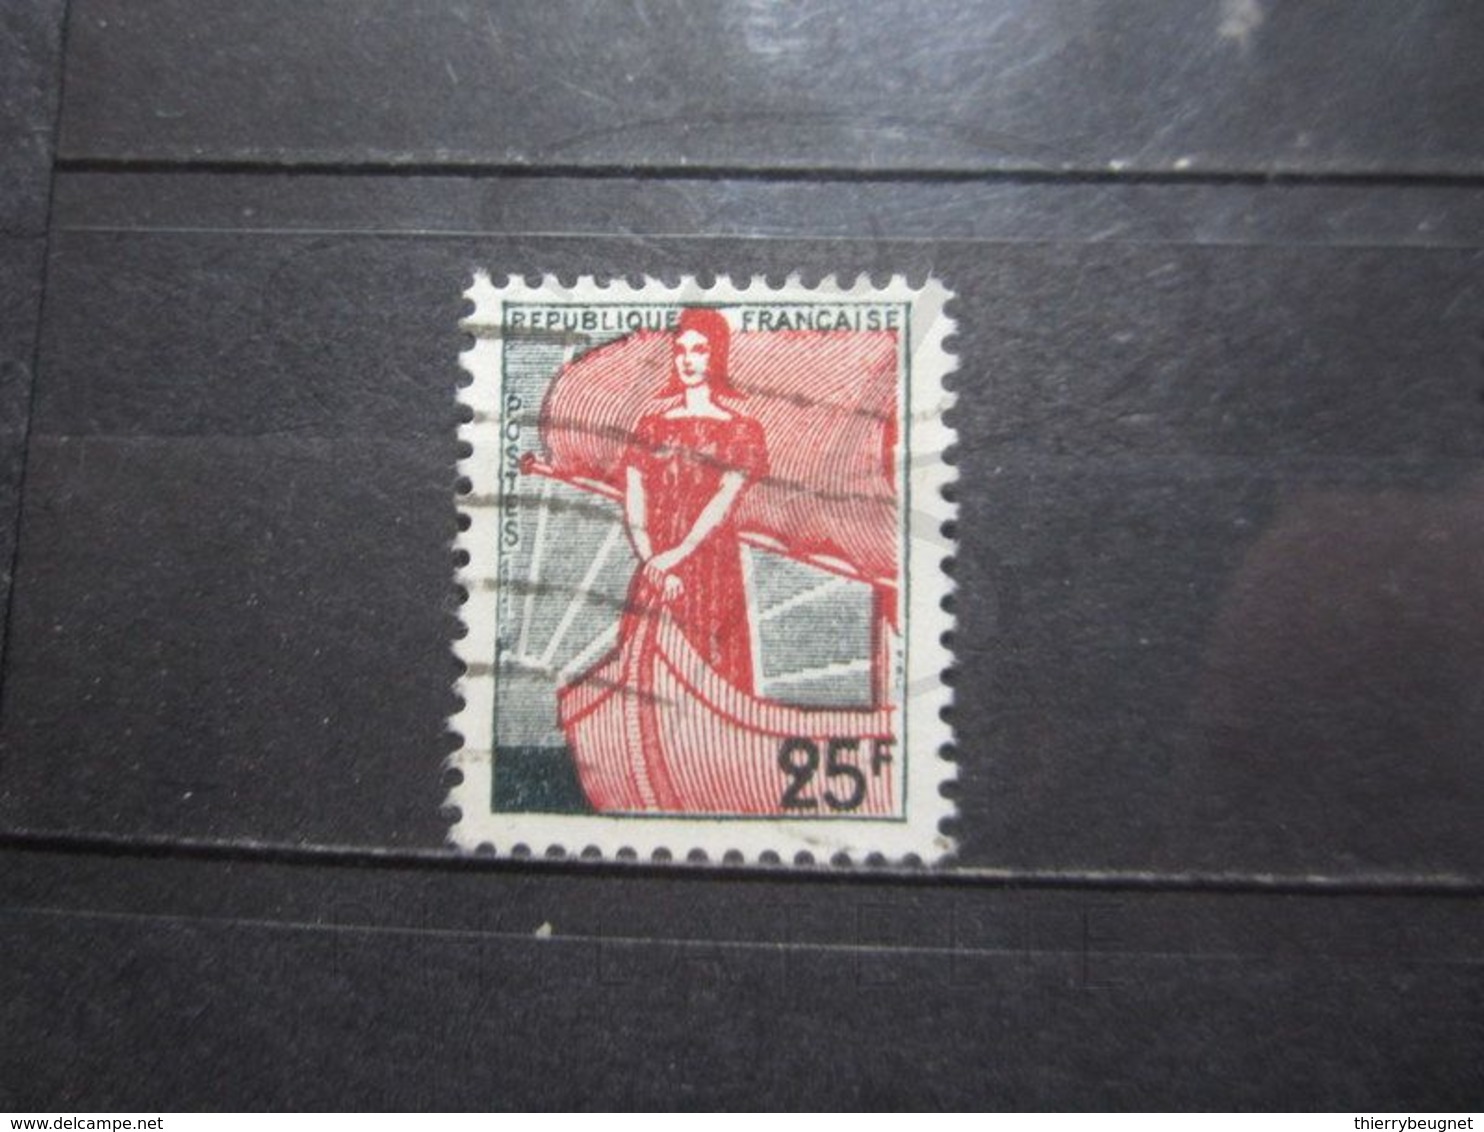 VEND BEAU TIMBRE DE FRANCE N° 1216 , ROUGE DECALE A GAUCHE !!! - Used Stamps